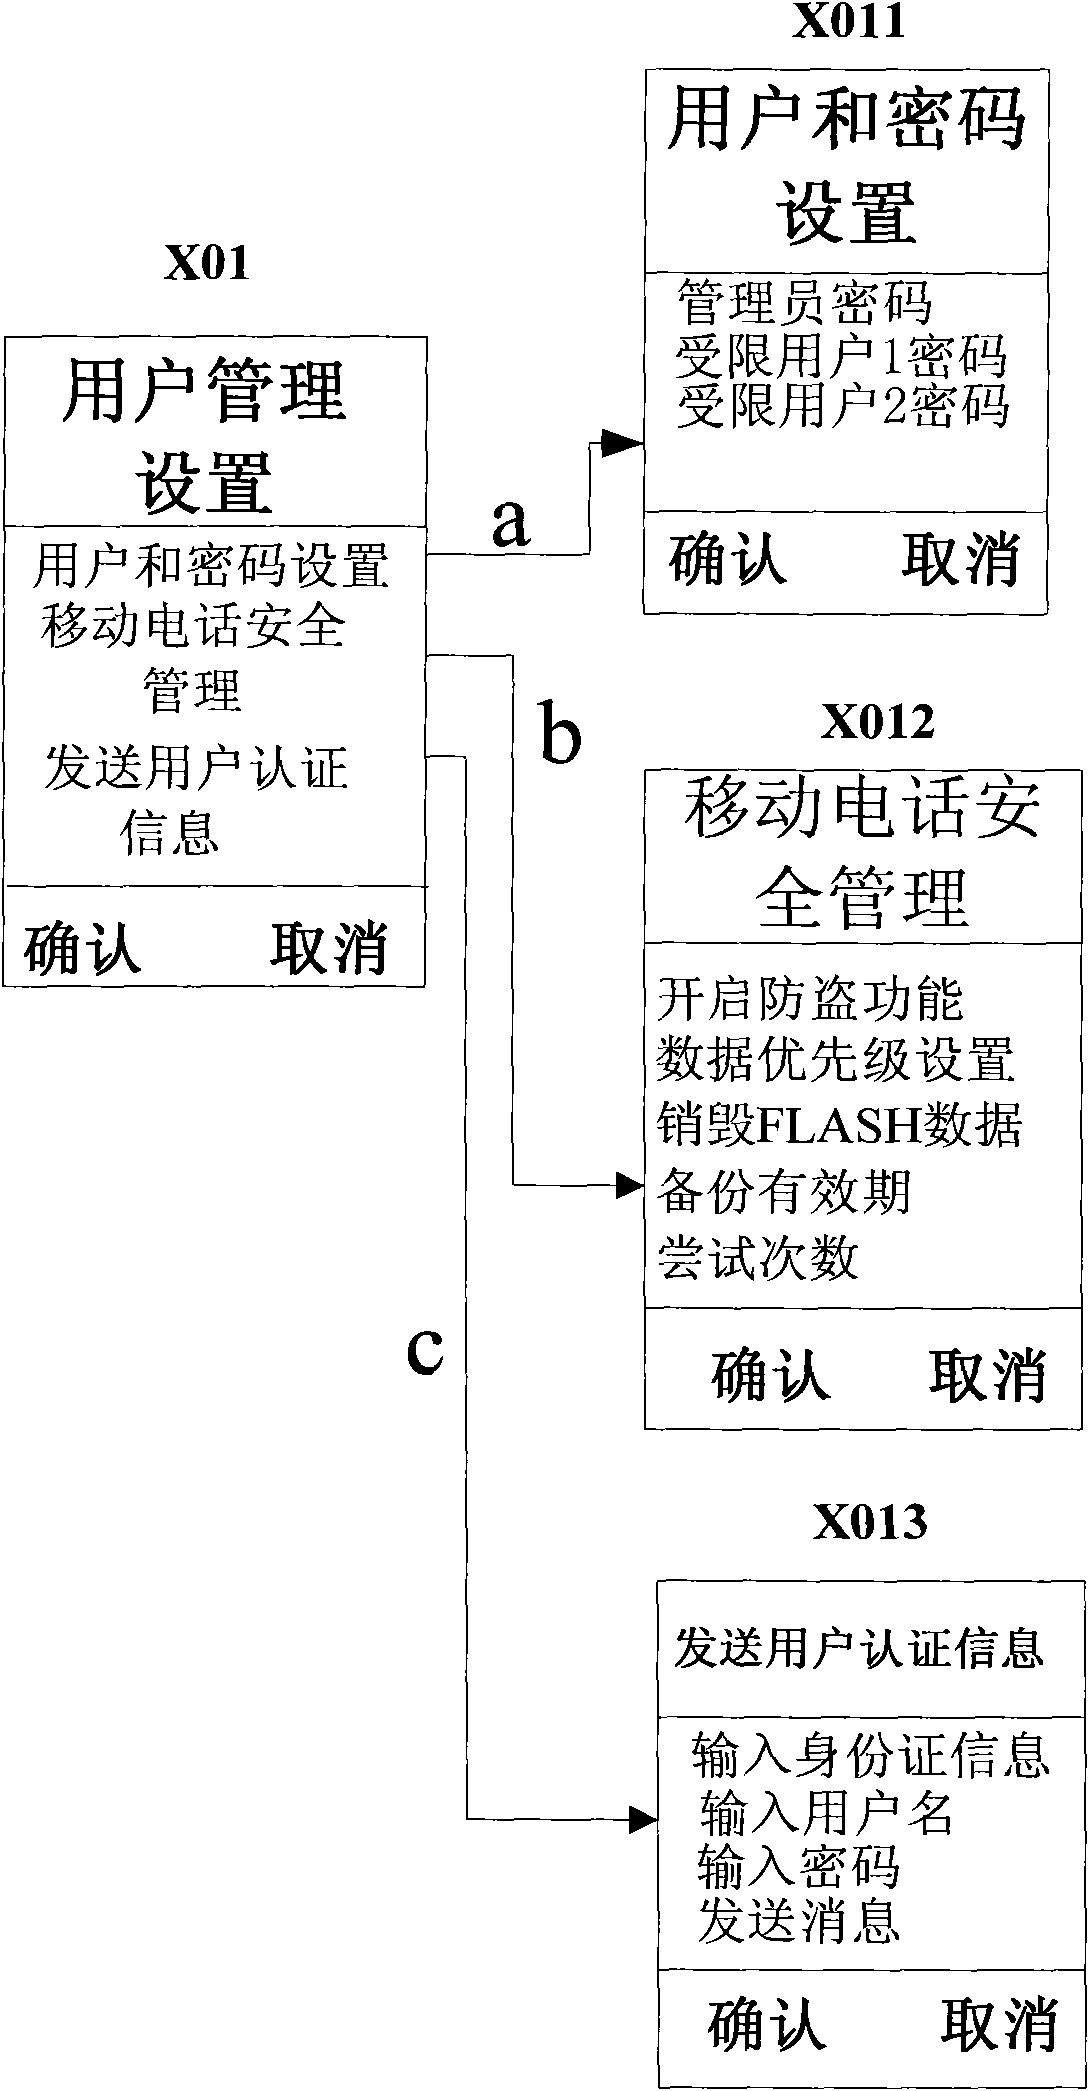 Method and system for retrieving FLASH data from mobile telephone, and mobile telephone